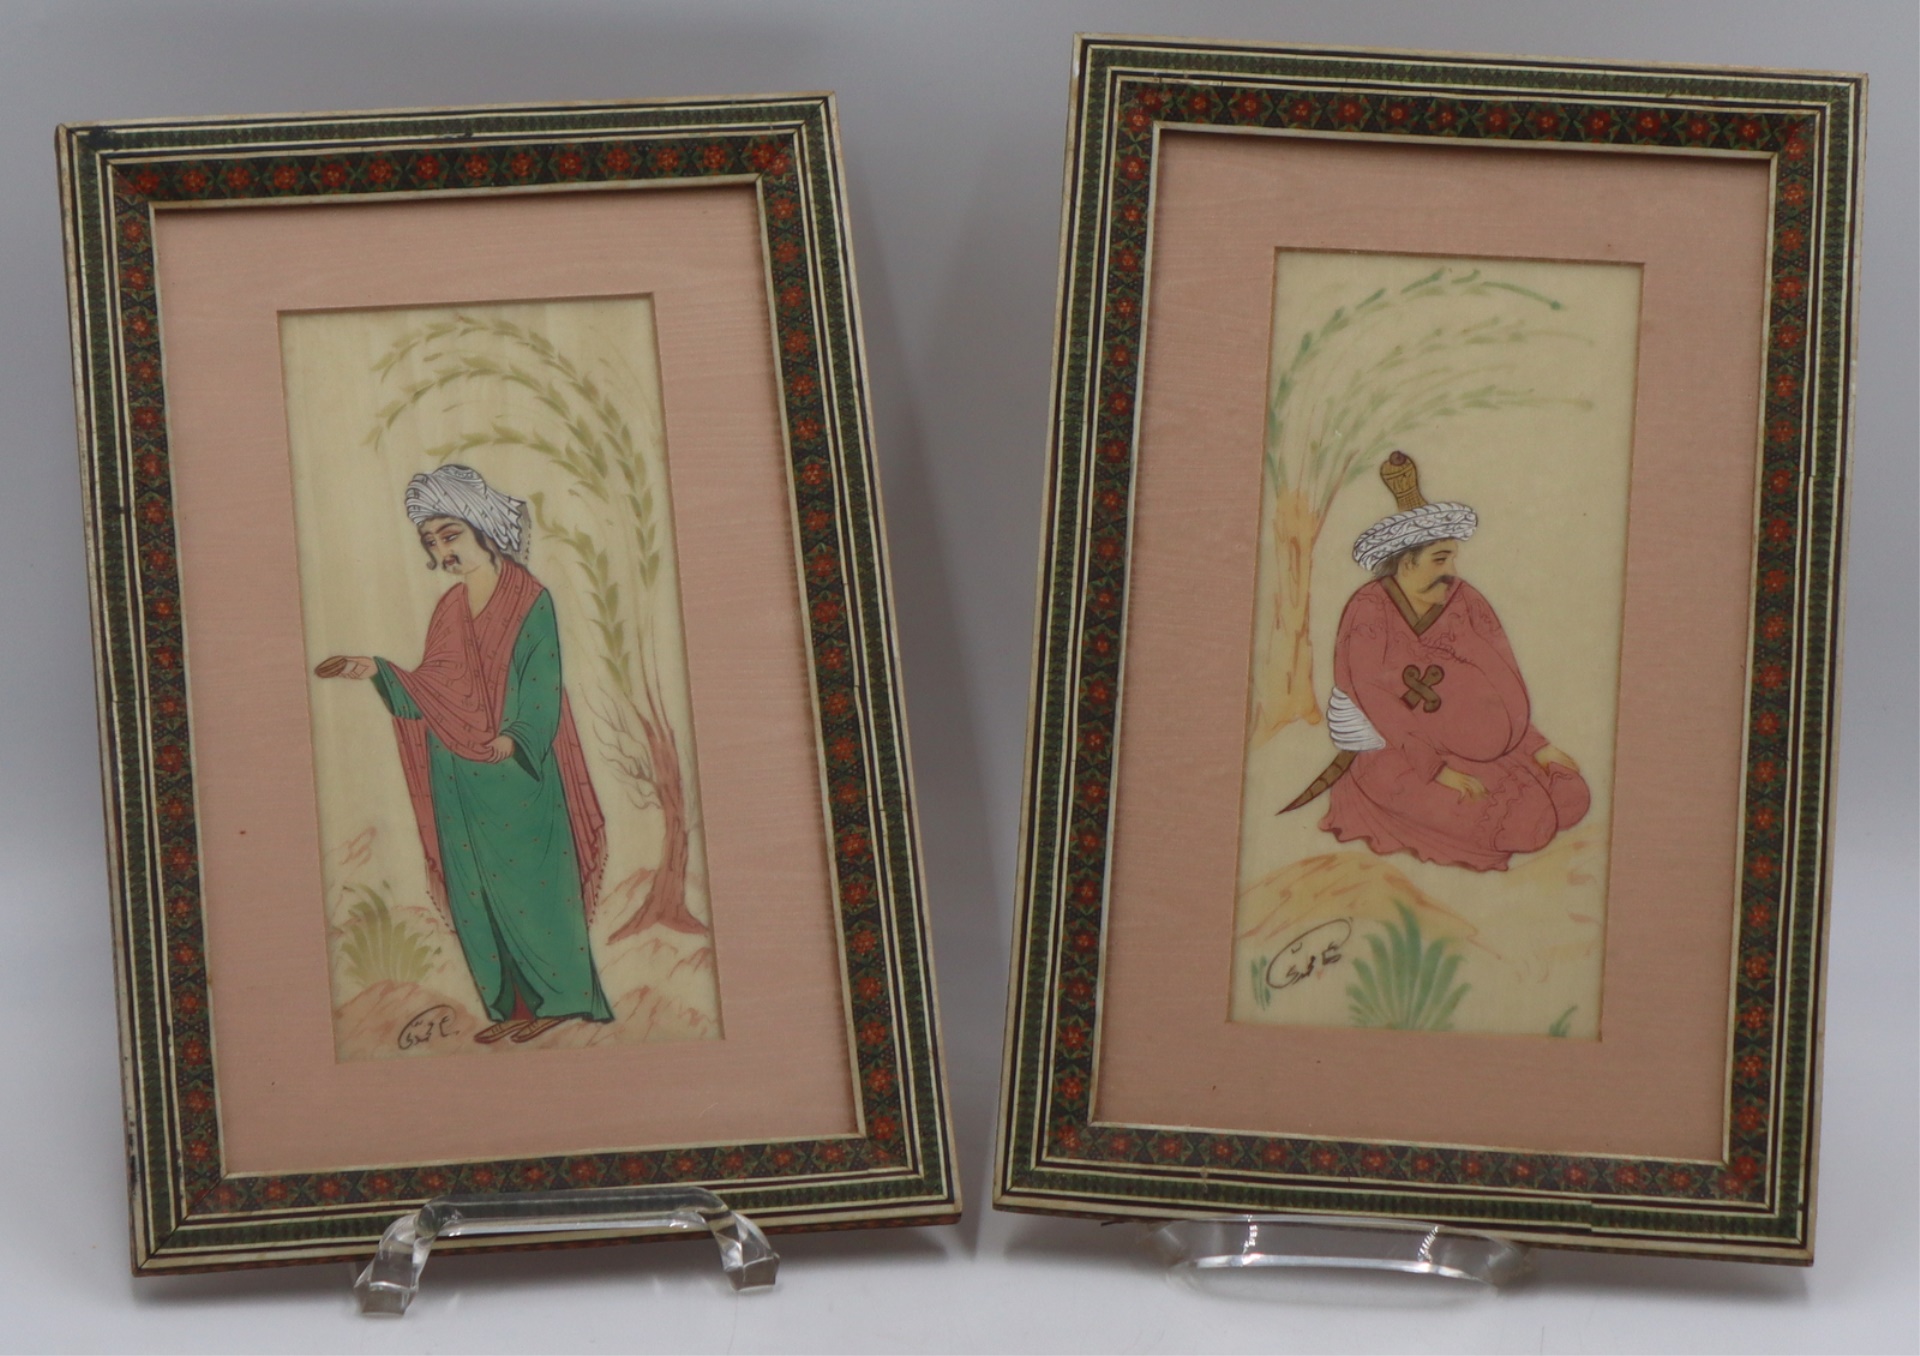  2 SIGNED PERSIAN MINIATURES OF 3bc249